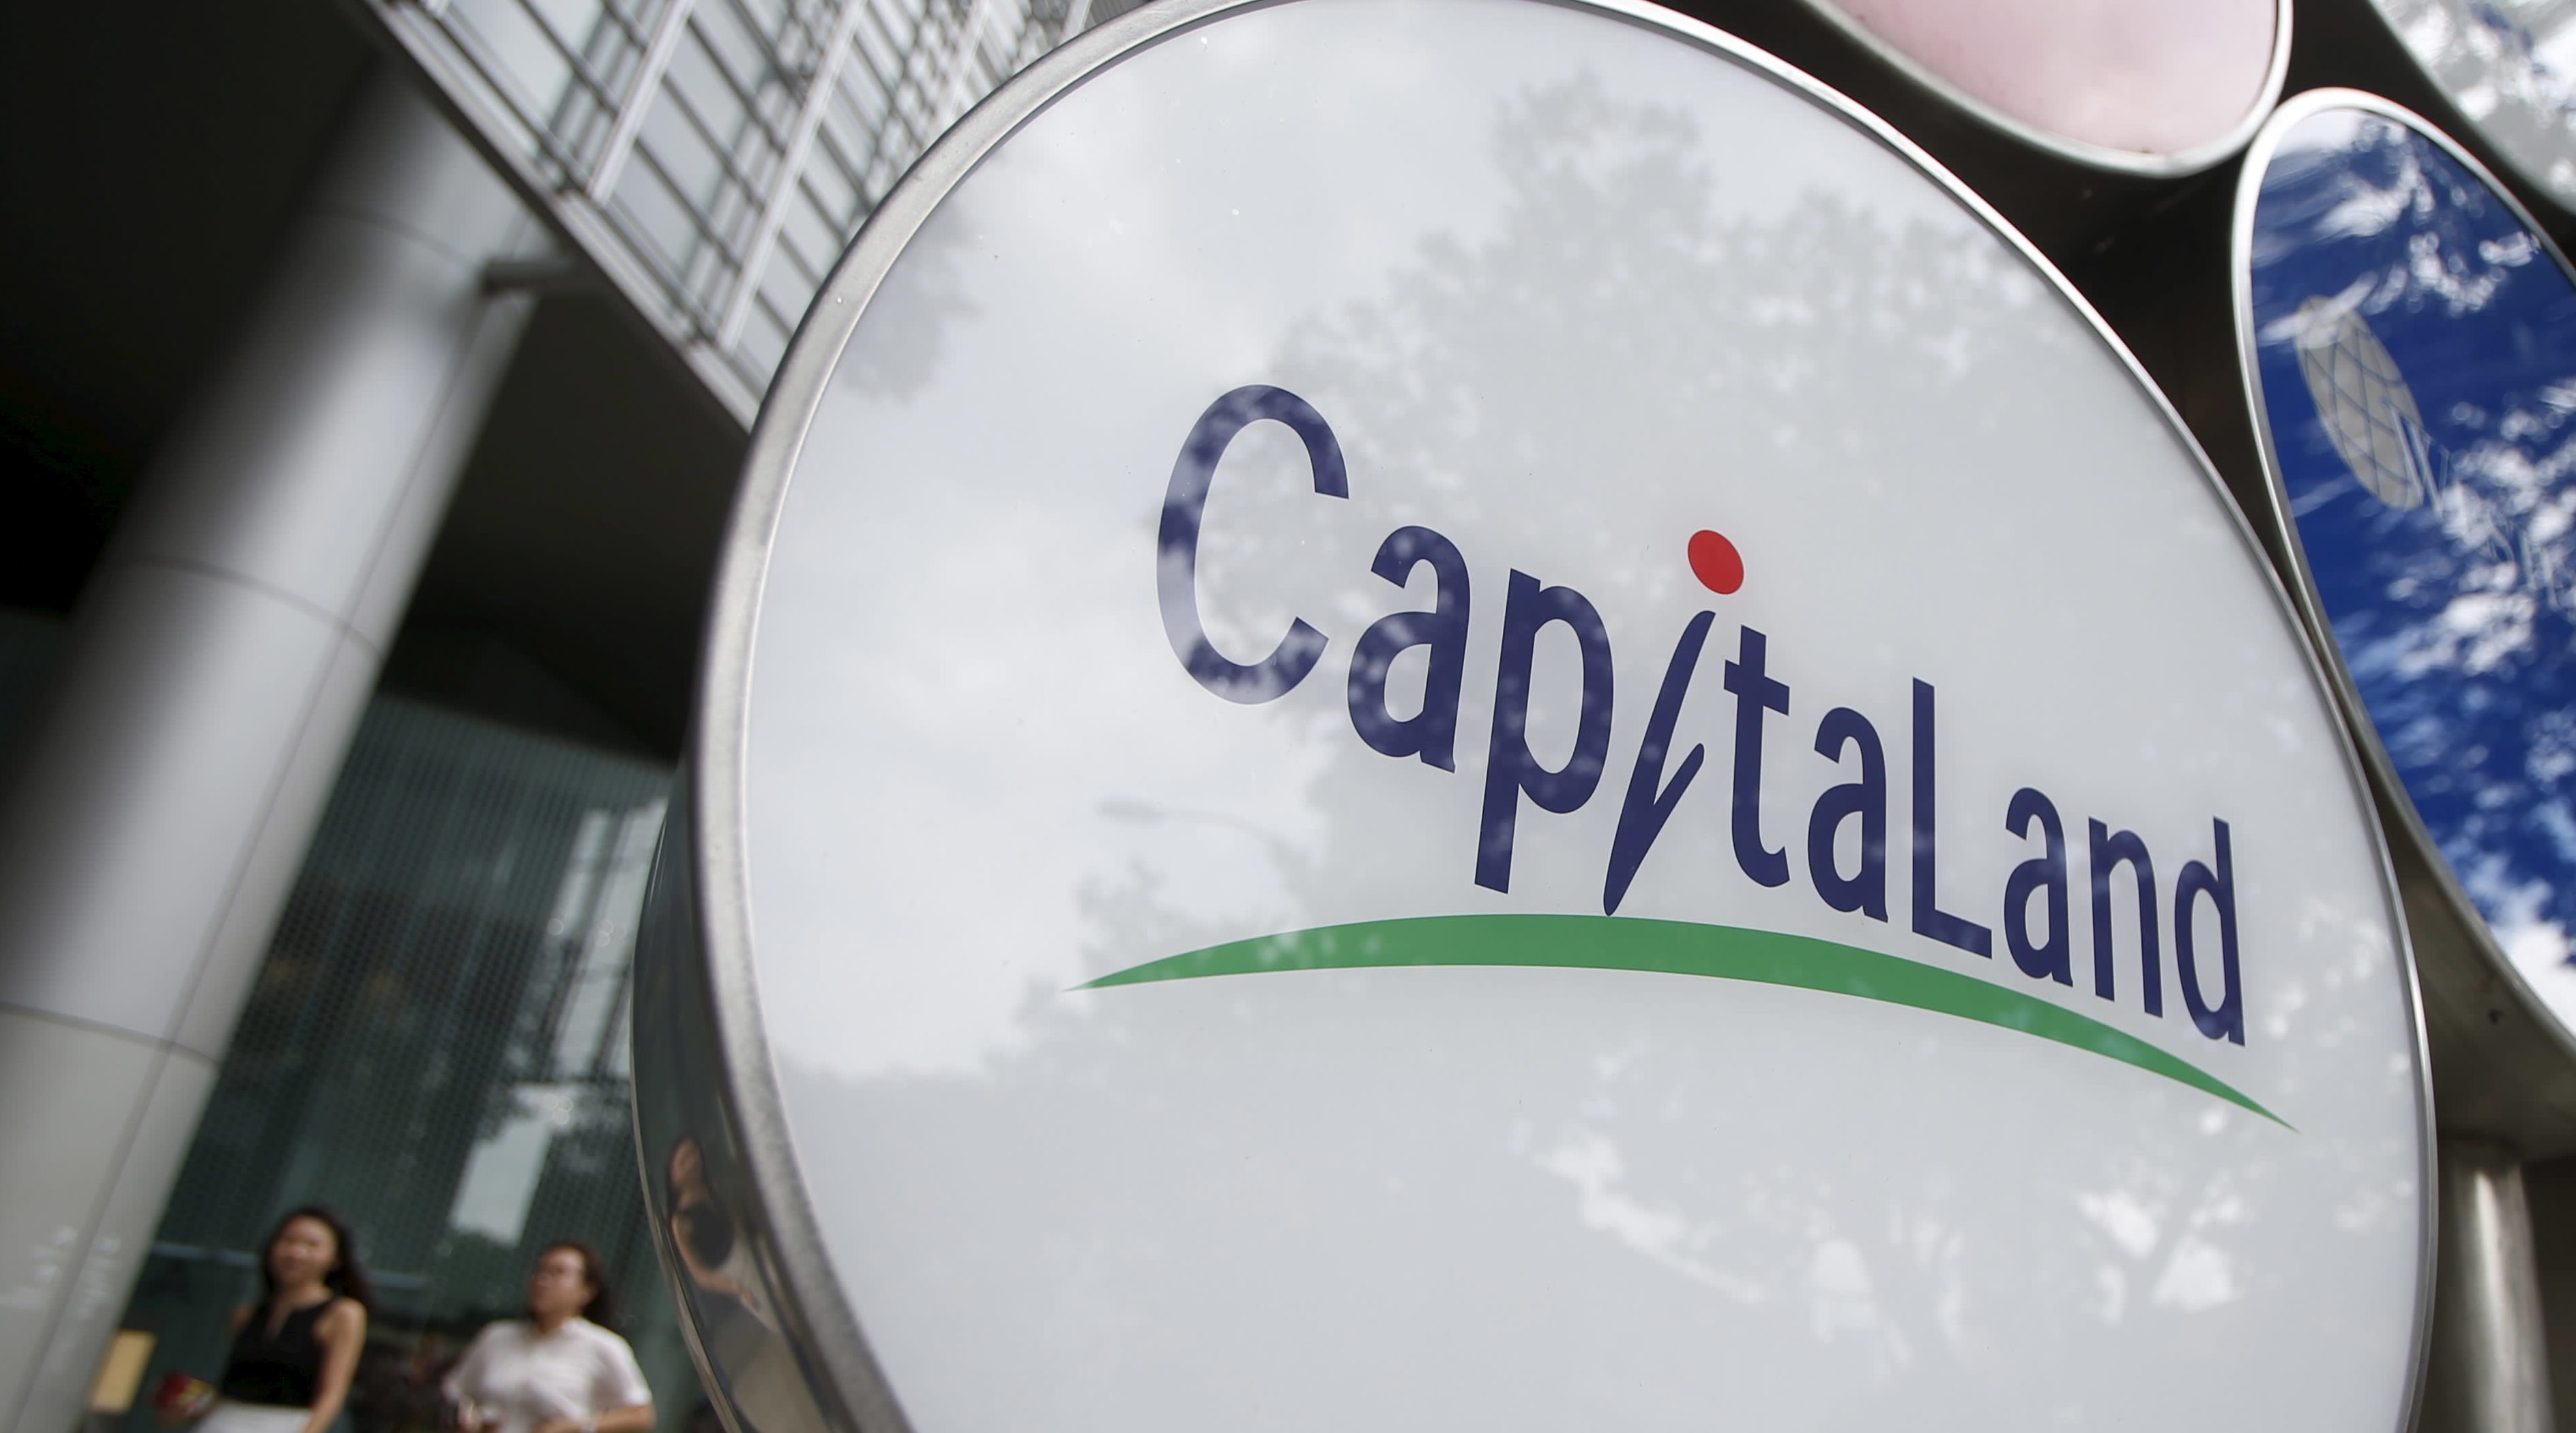 SG Digest: CapitaLand launches e-commerce platform; Oxley gets $223m offer for Chevron House